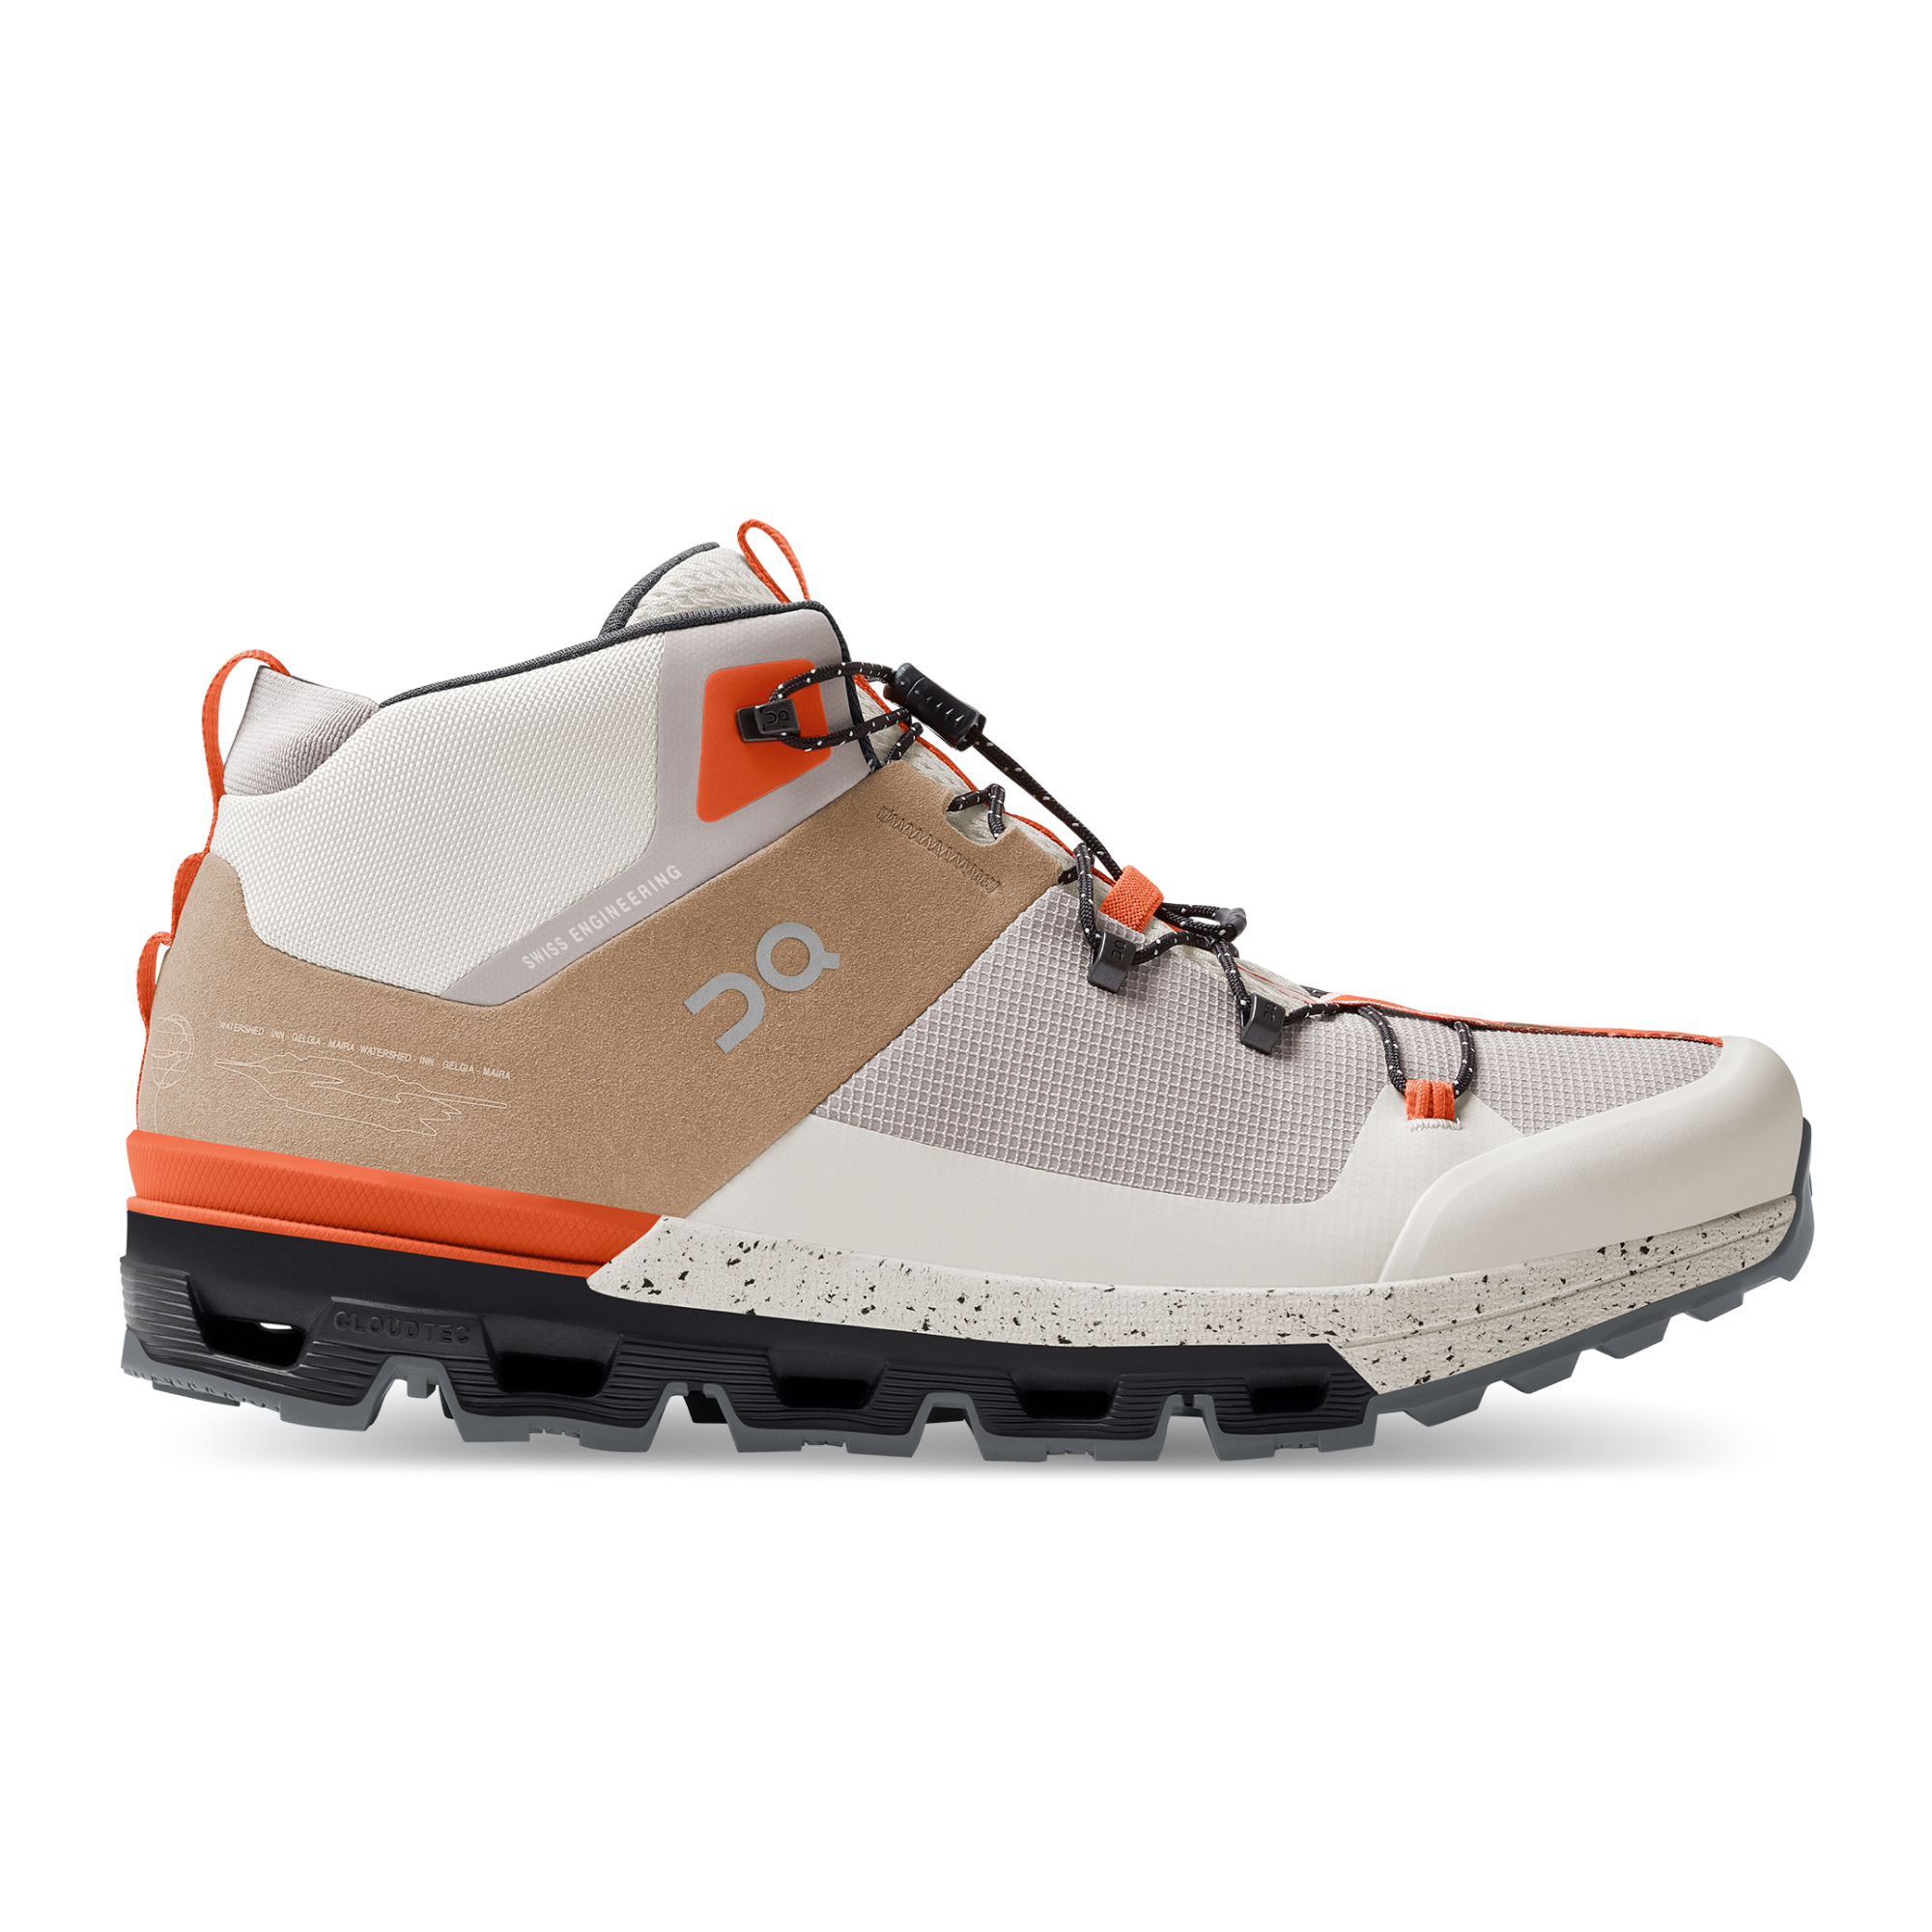 Men's Cloudtrax | On United States